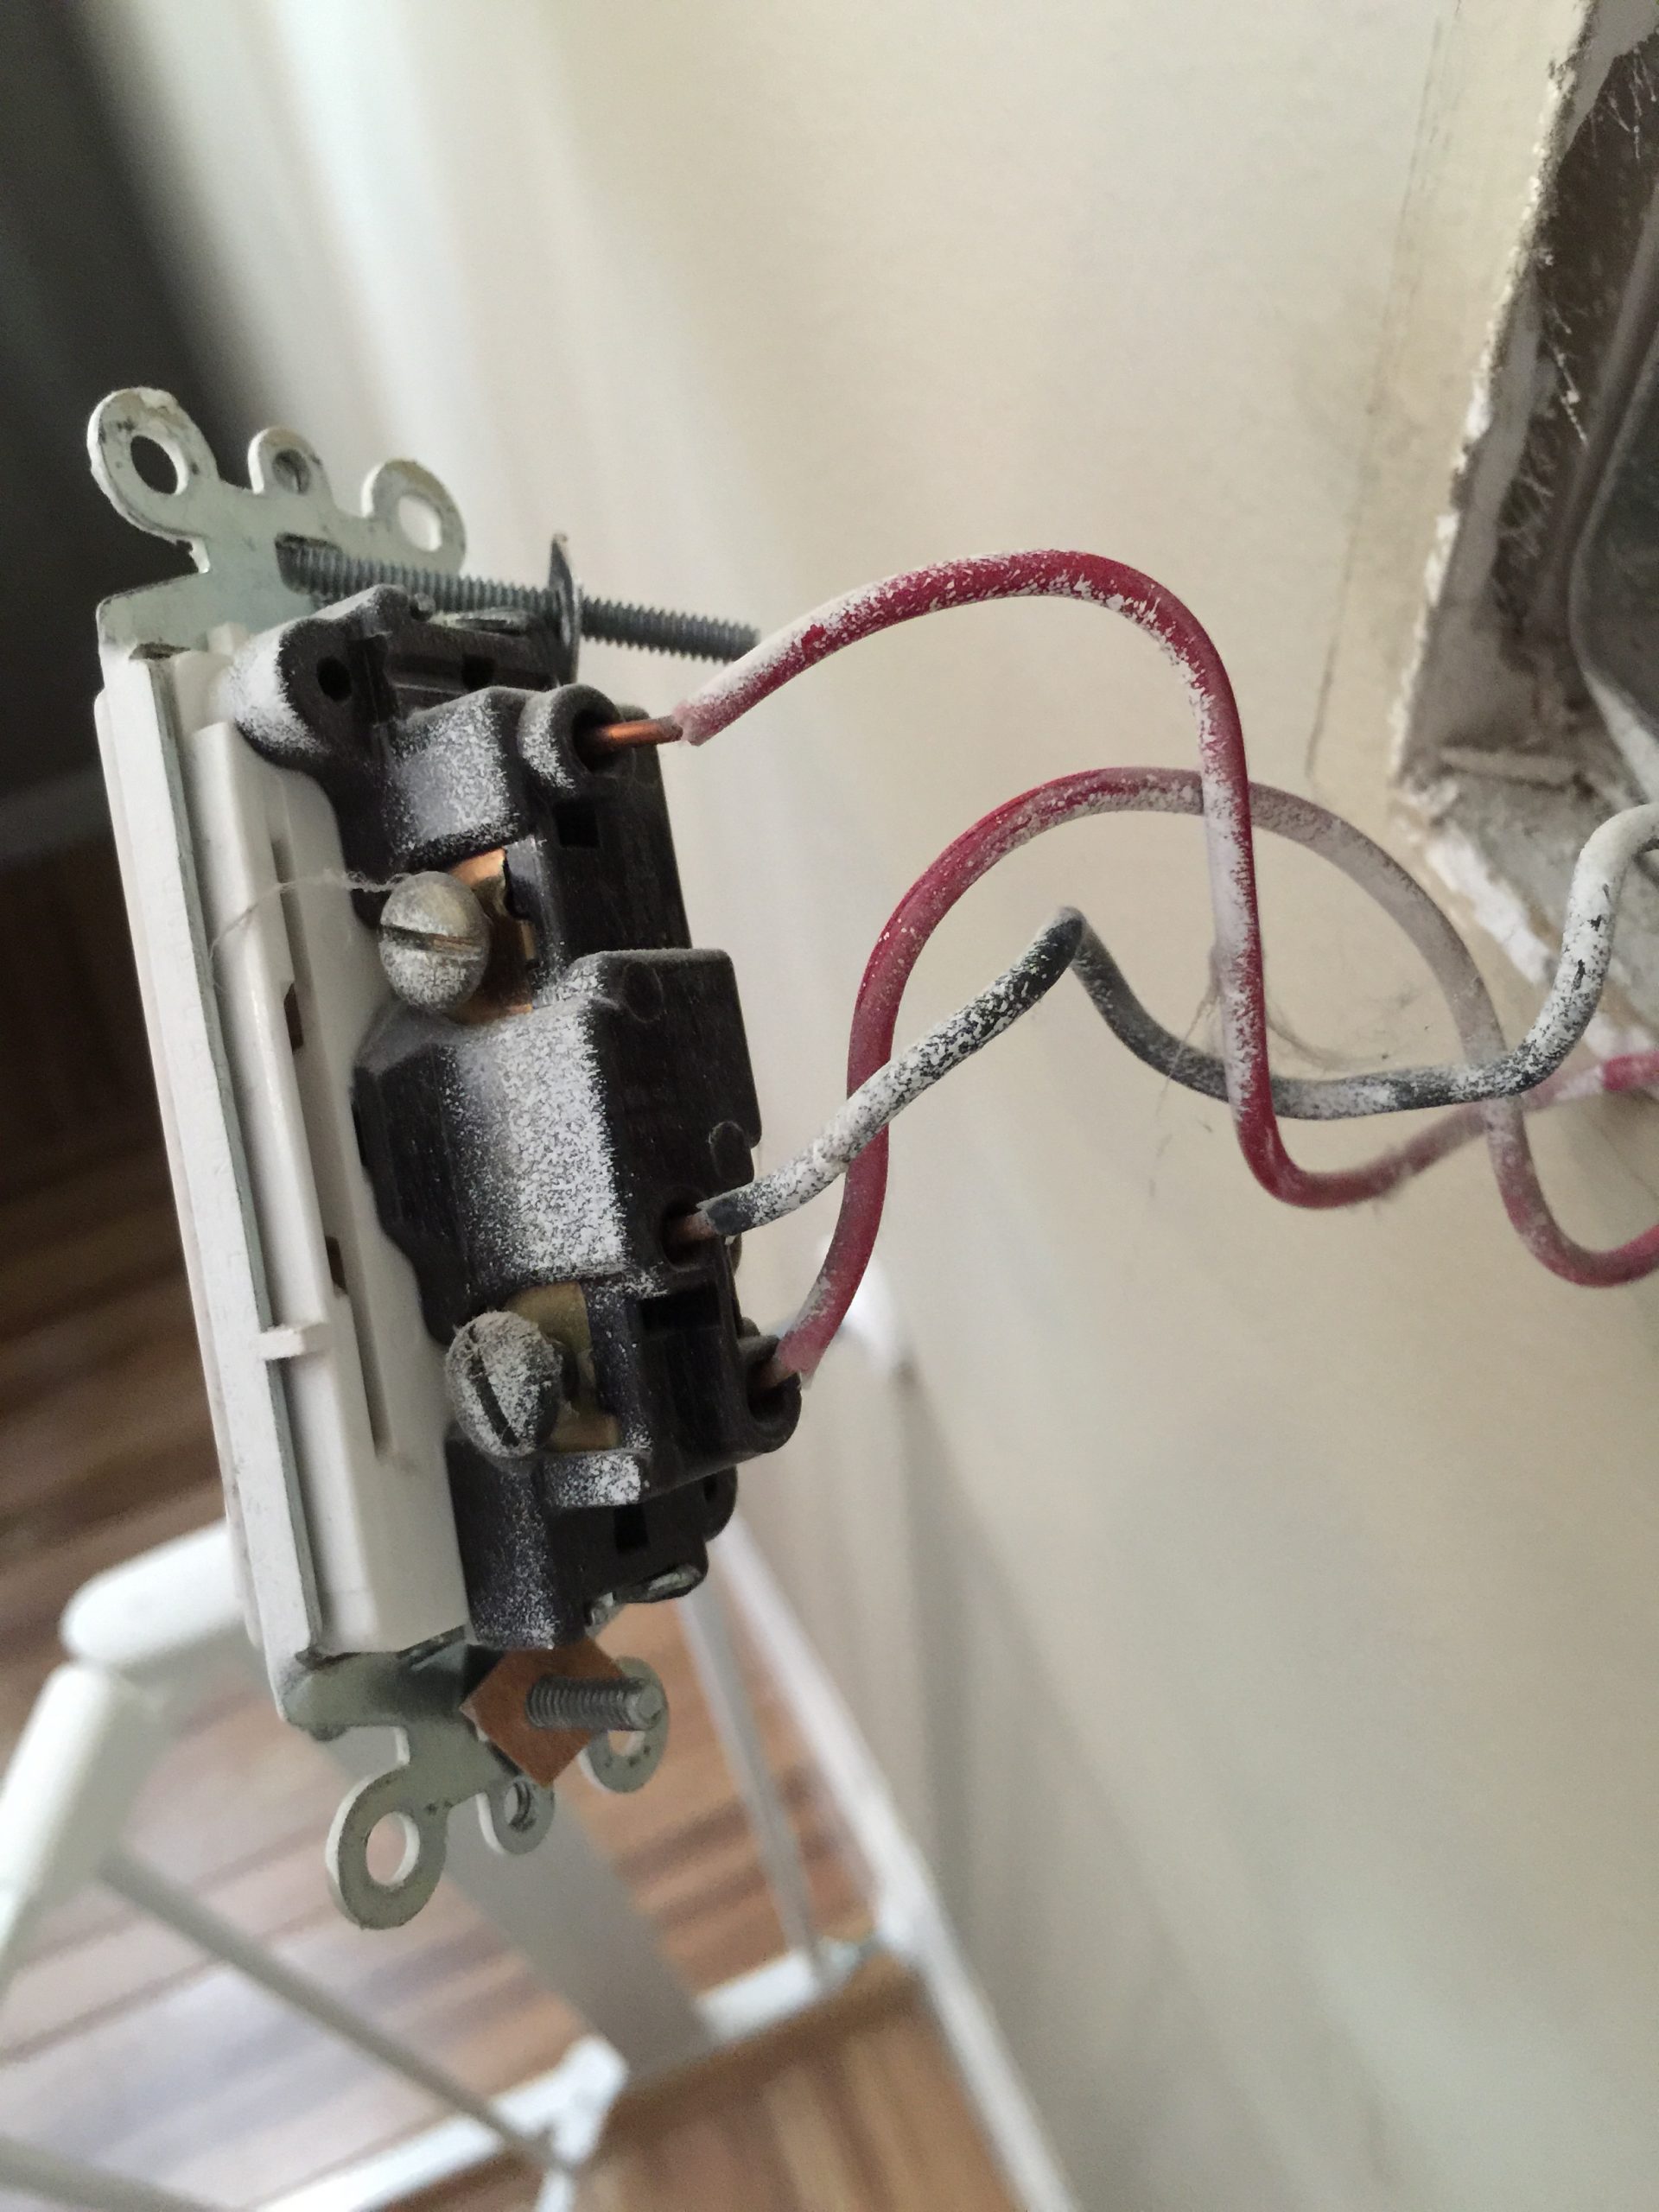 Wiring A Light Switch With Red And Black Wires Wiring throughout size 2448 X 3264